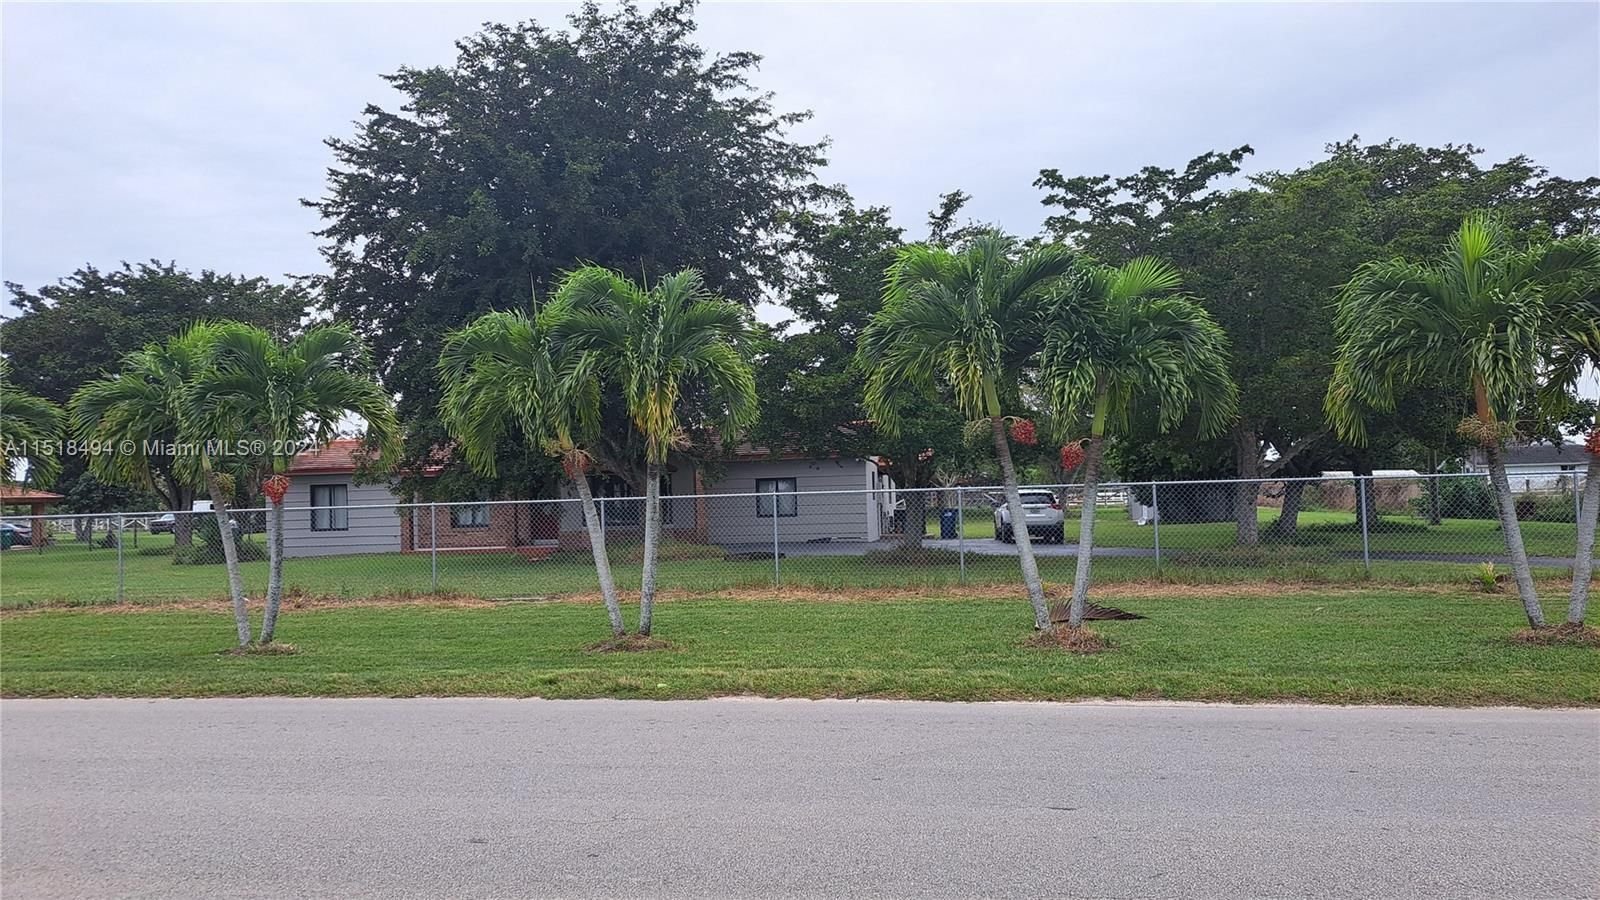 Real estate property located at 23700 207th Ave, Miami-Dade County, No mame, Homestead, FL